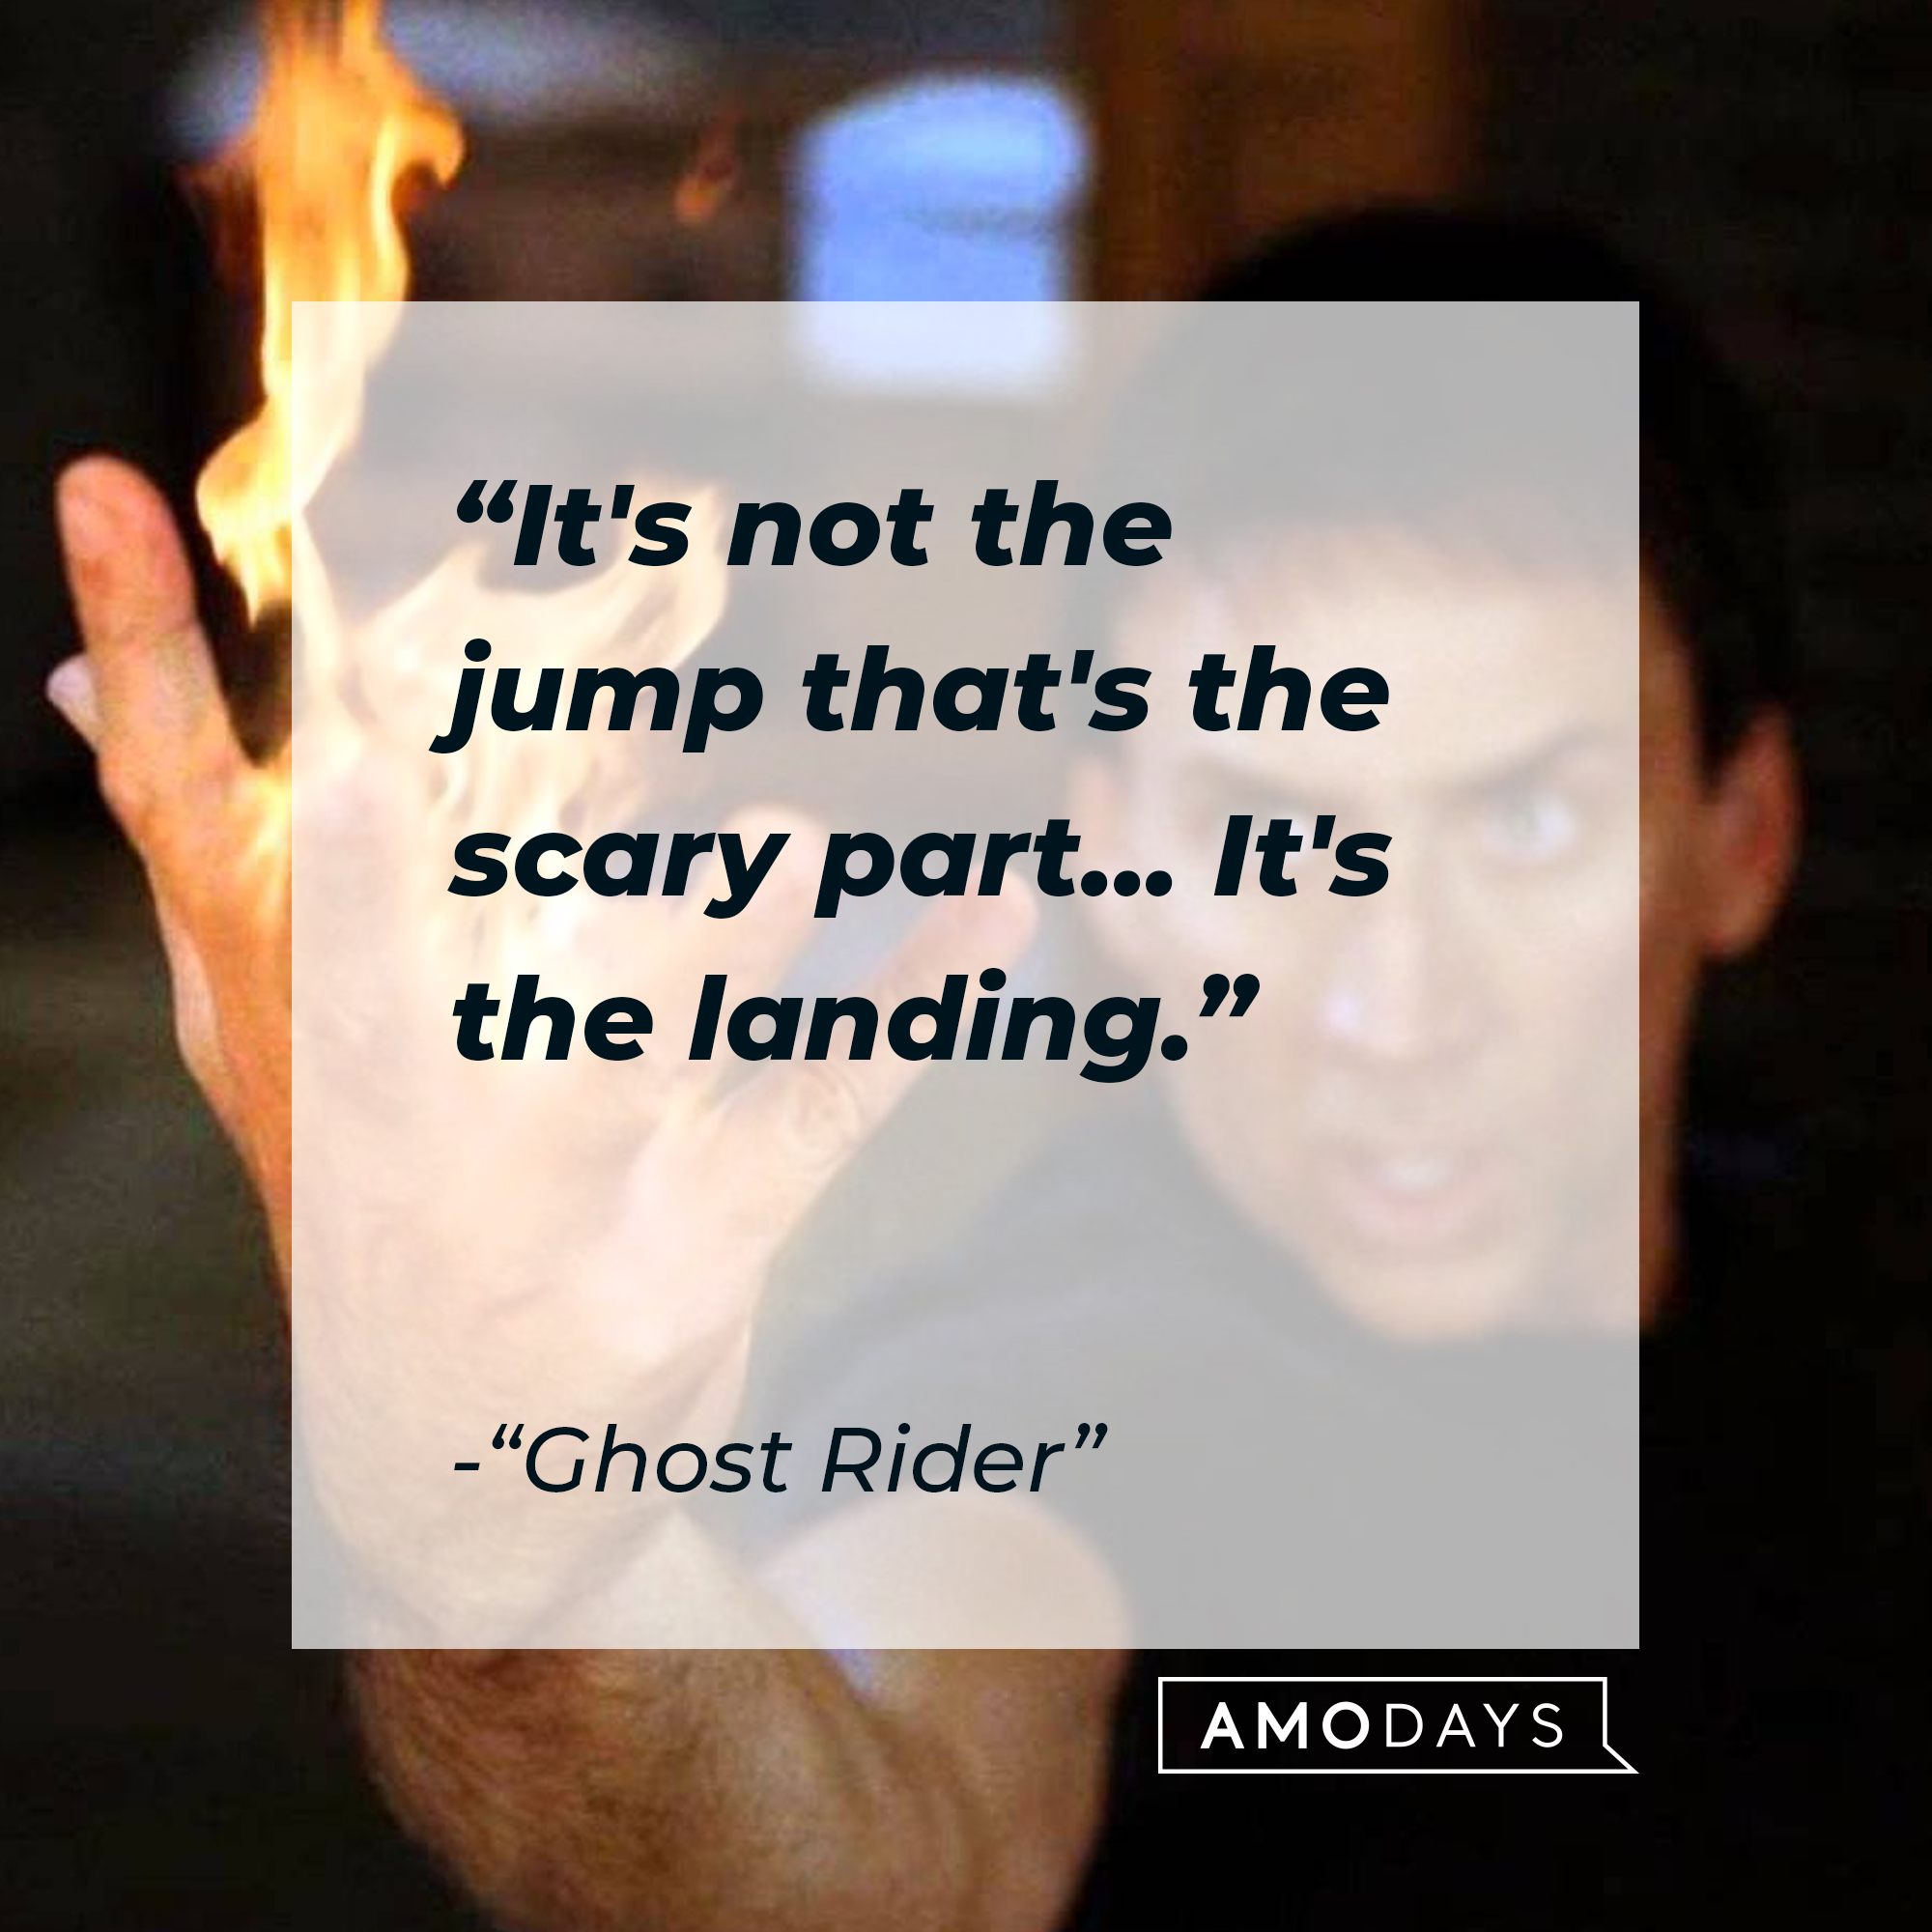 "Ghost Rider" quote: "It's not the jump that's the scary part... It's the landing." | Source: facebook.com/ghostridermovie